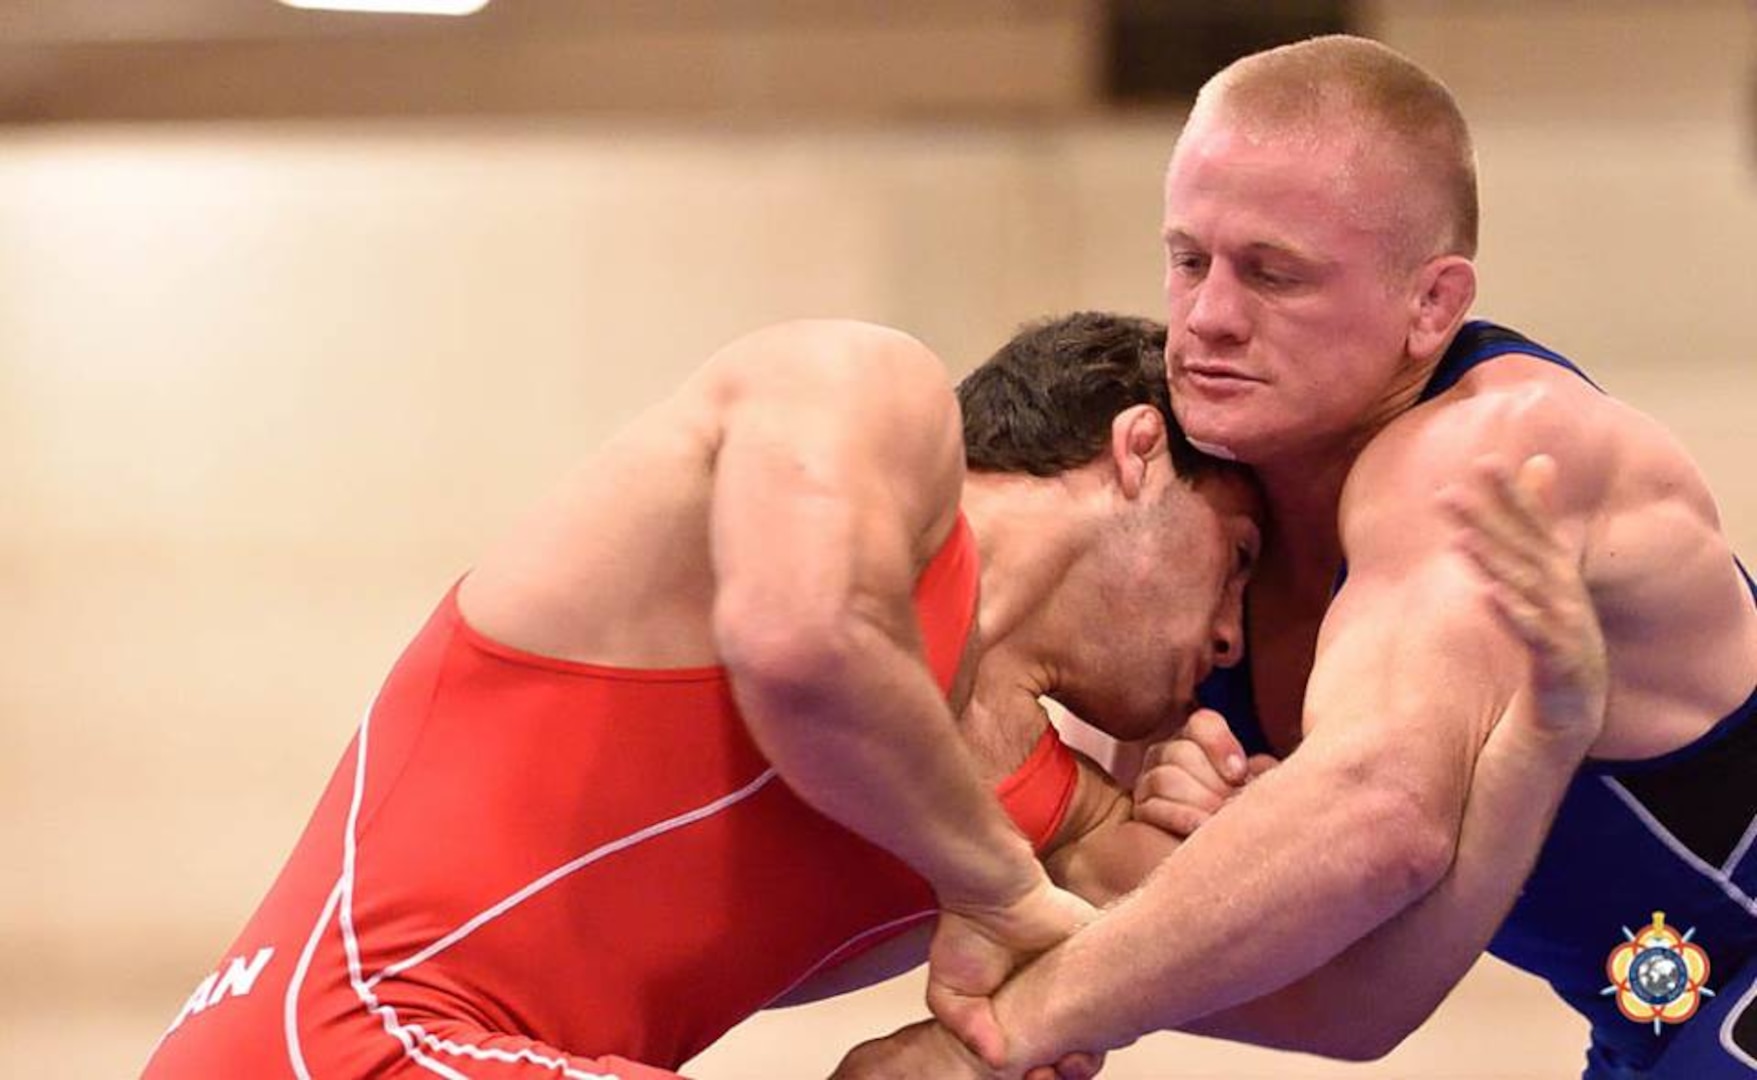 Army Capt. Jon Anderson takes silver during the 75 kg Greco-Roman competition at the 29th CISM World Military Wrestling Championship at Joint Base McGuire-Dix-Lakehurst, NJ 1-8 October 2014.